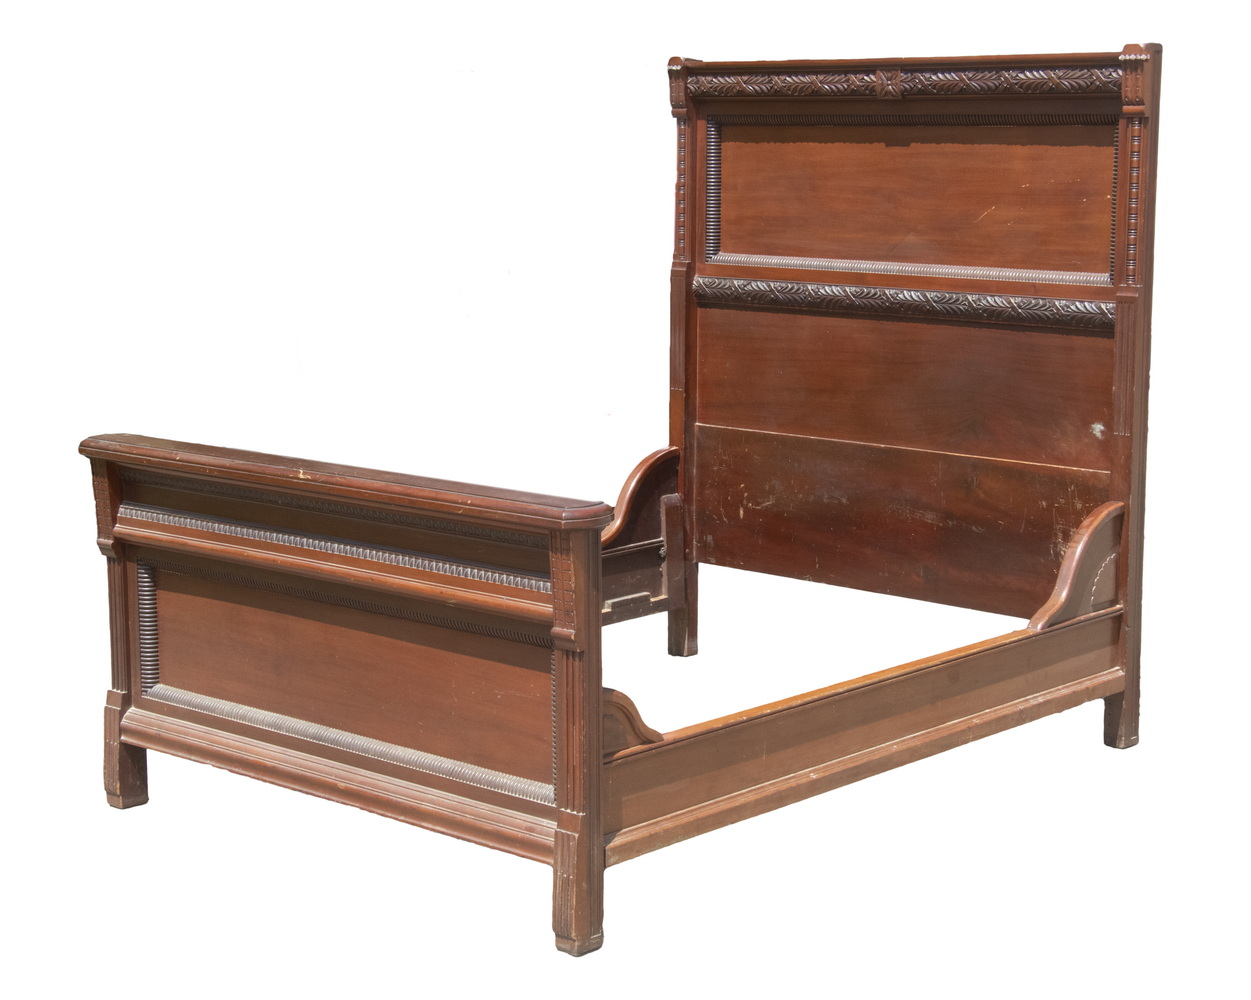 VICTORIAN FULL-SIZE BED 19th c.